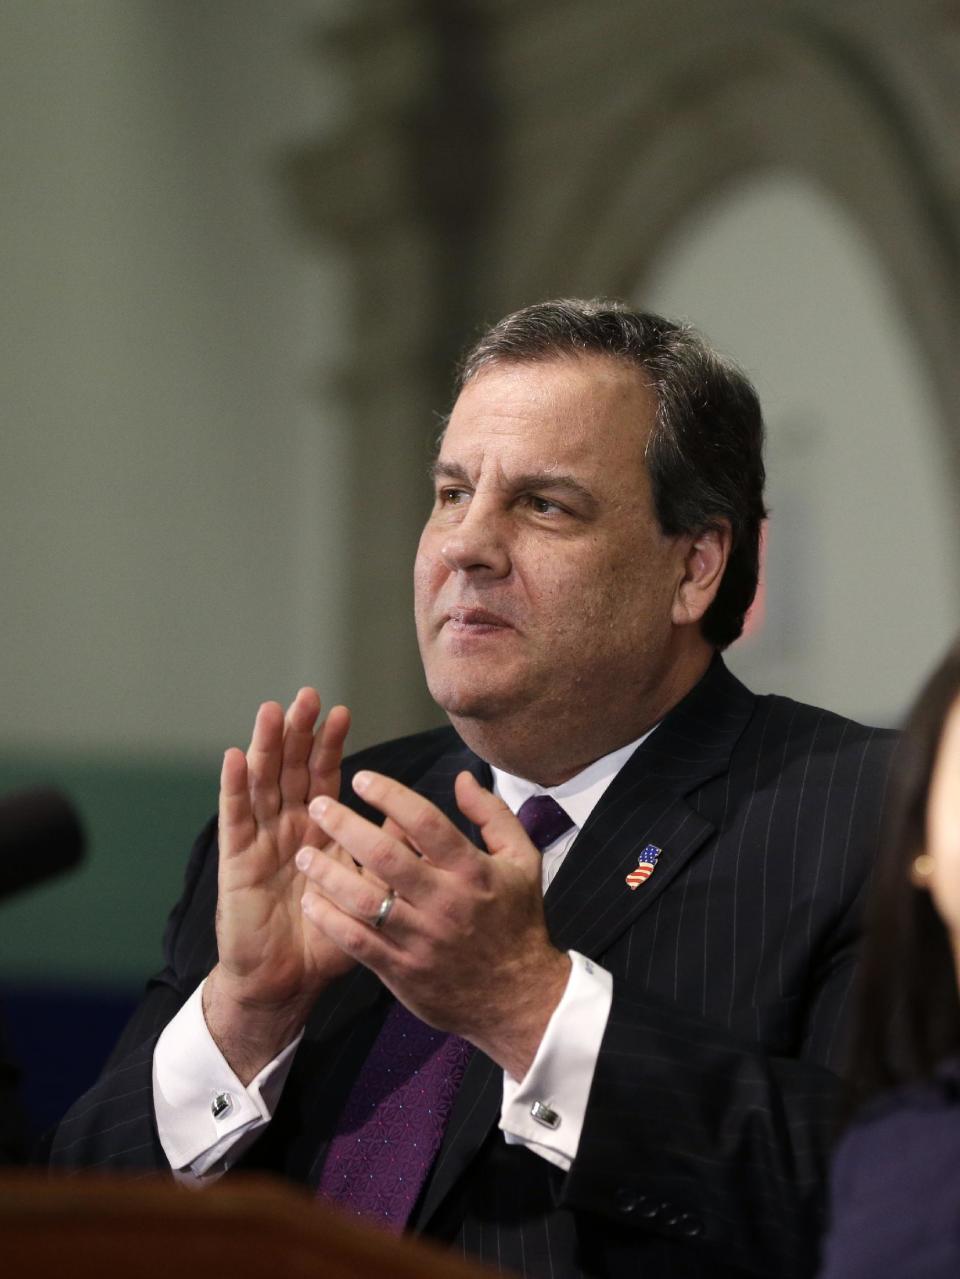 New Jersey Gov. Chris Christie applauds during a gathering in Union City, N.J., Tuesday, Jan. 7, 2014. A top aide to Christie is linked through emails and text messages to a seemingly deliberate plan to create traffic gridlock in a town at the base of a major bridge after its mayor refused to endorse Christie for re-election. "Time for some traffic problems in Fort Lee," Christie aide Bridget Anne Kelly wrote in an Aug. 13 email to David Wildstein, a top political appointee at the Port Authority of New York and New Jersey, which runs the George Washington Bridge connecting New Jersey and New York City, one of the world's busiest spans. (AP Photo/Mel Evans)